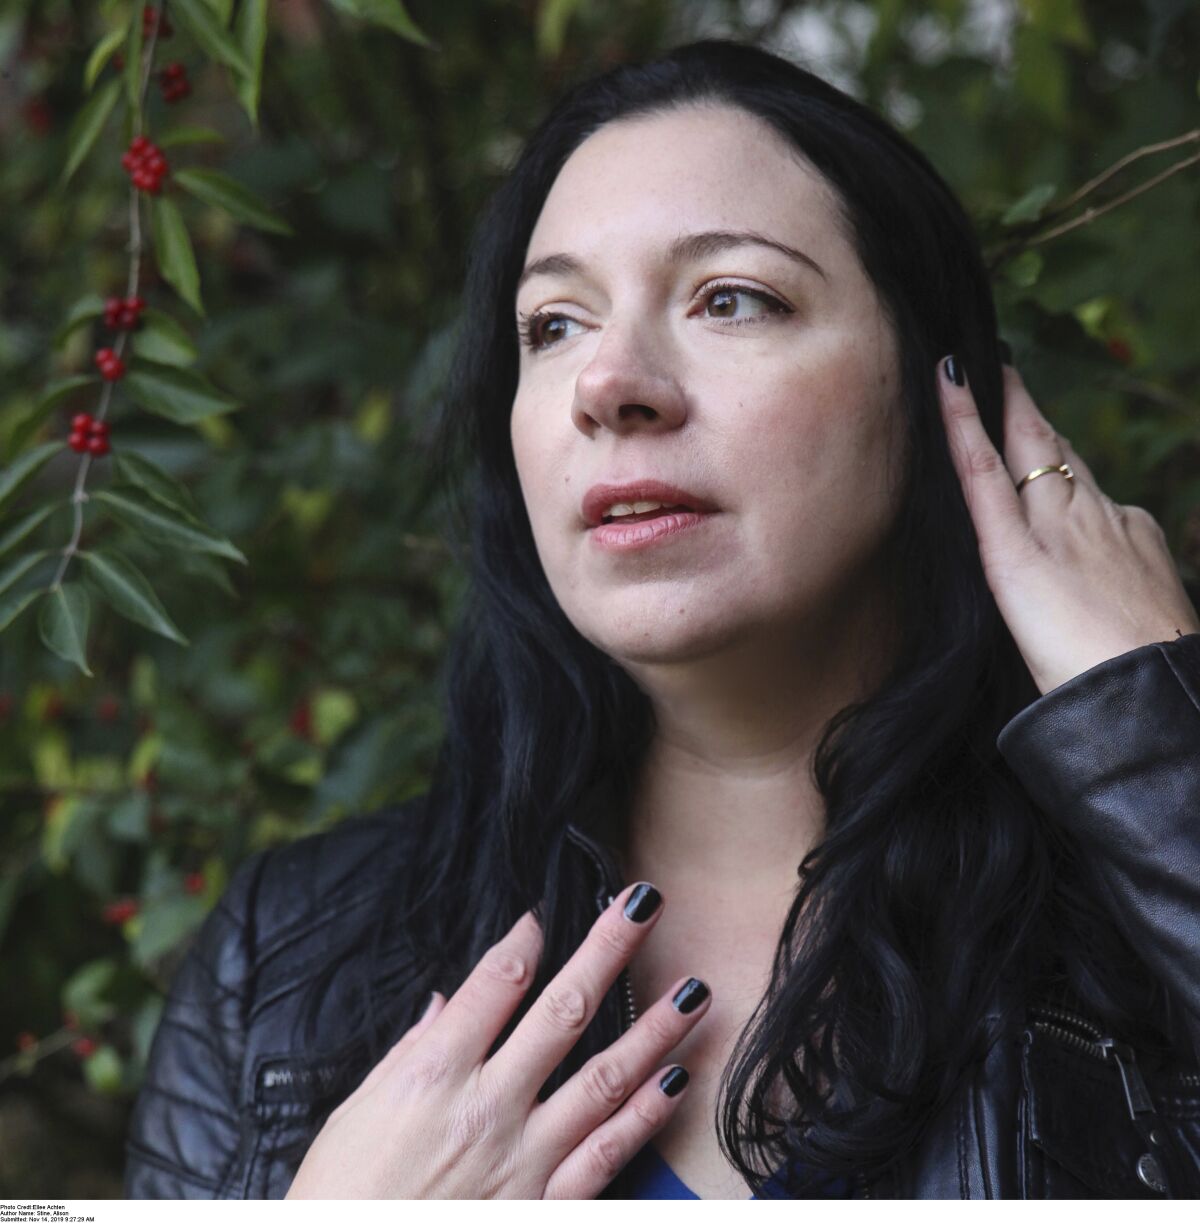 A woman with black hair and black nail polish in front of greenery.